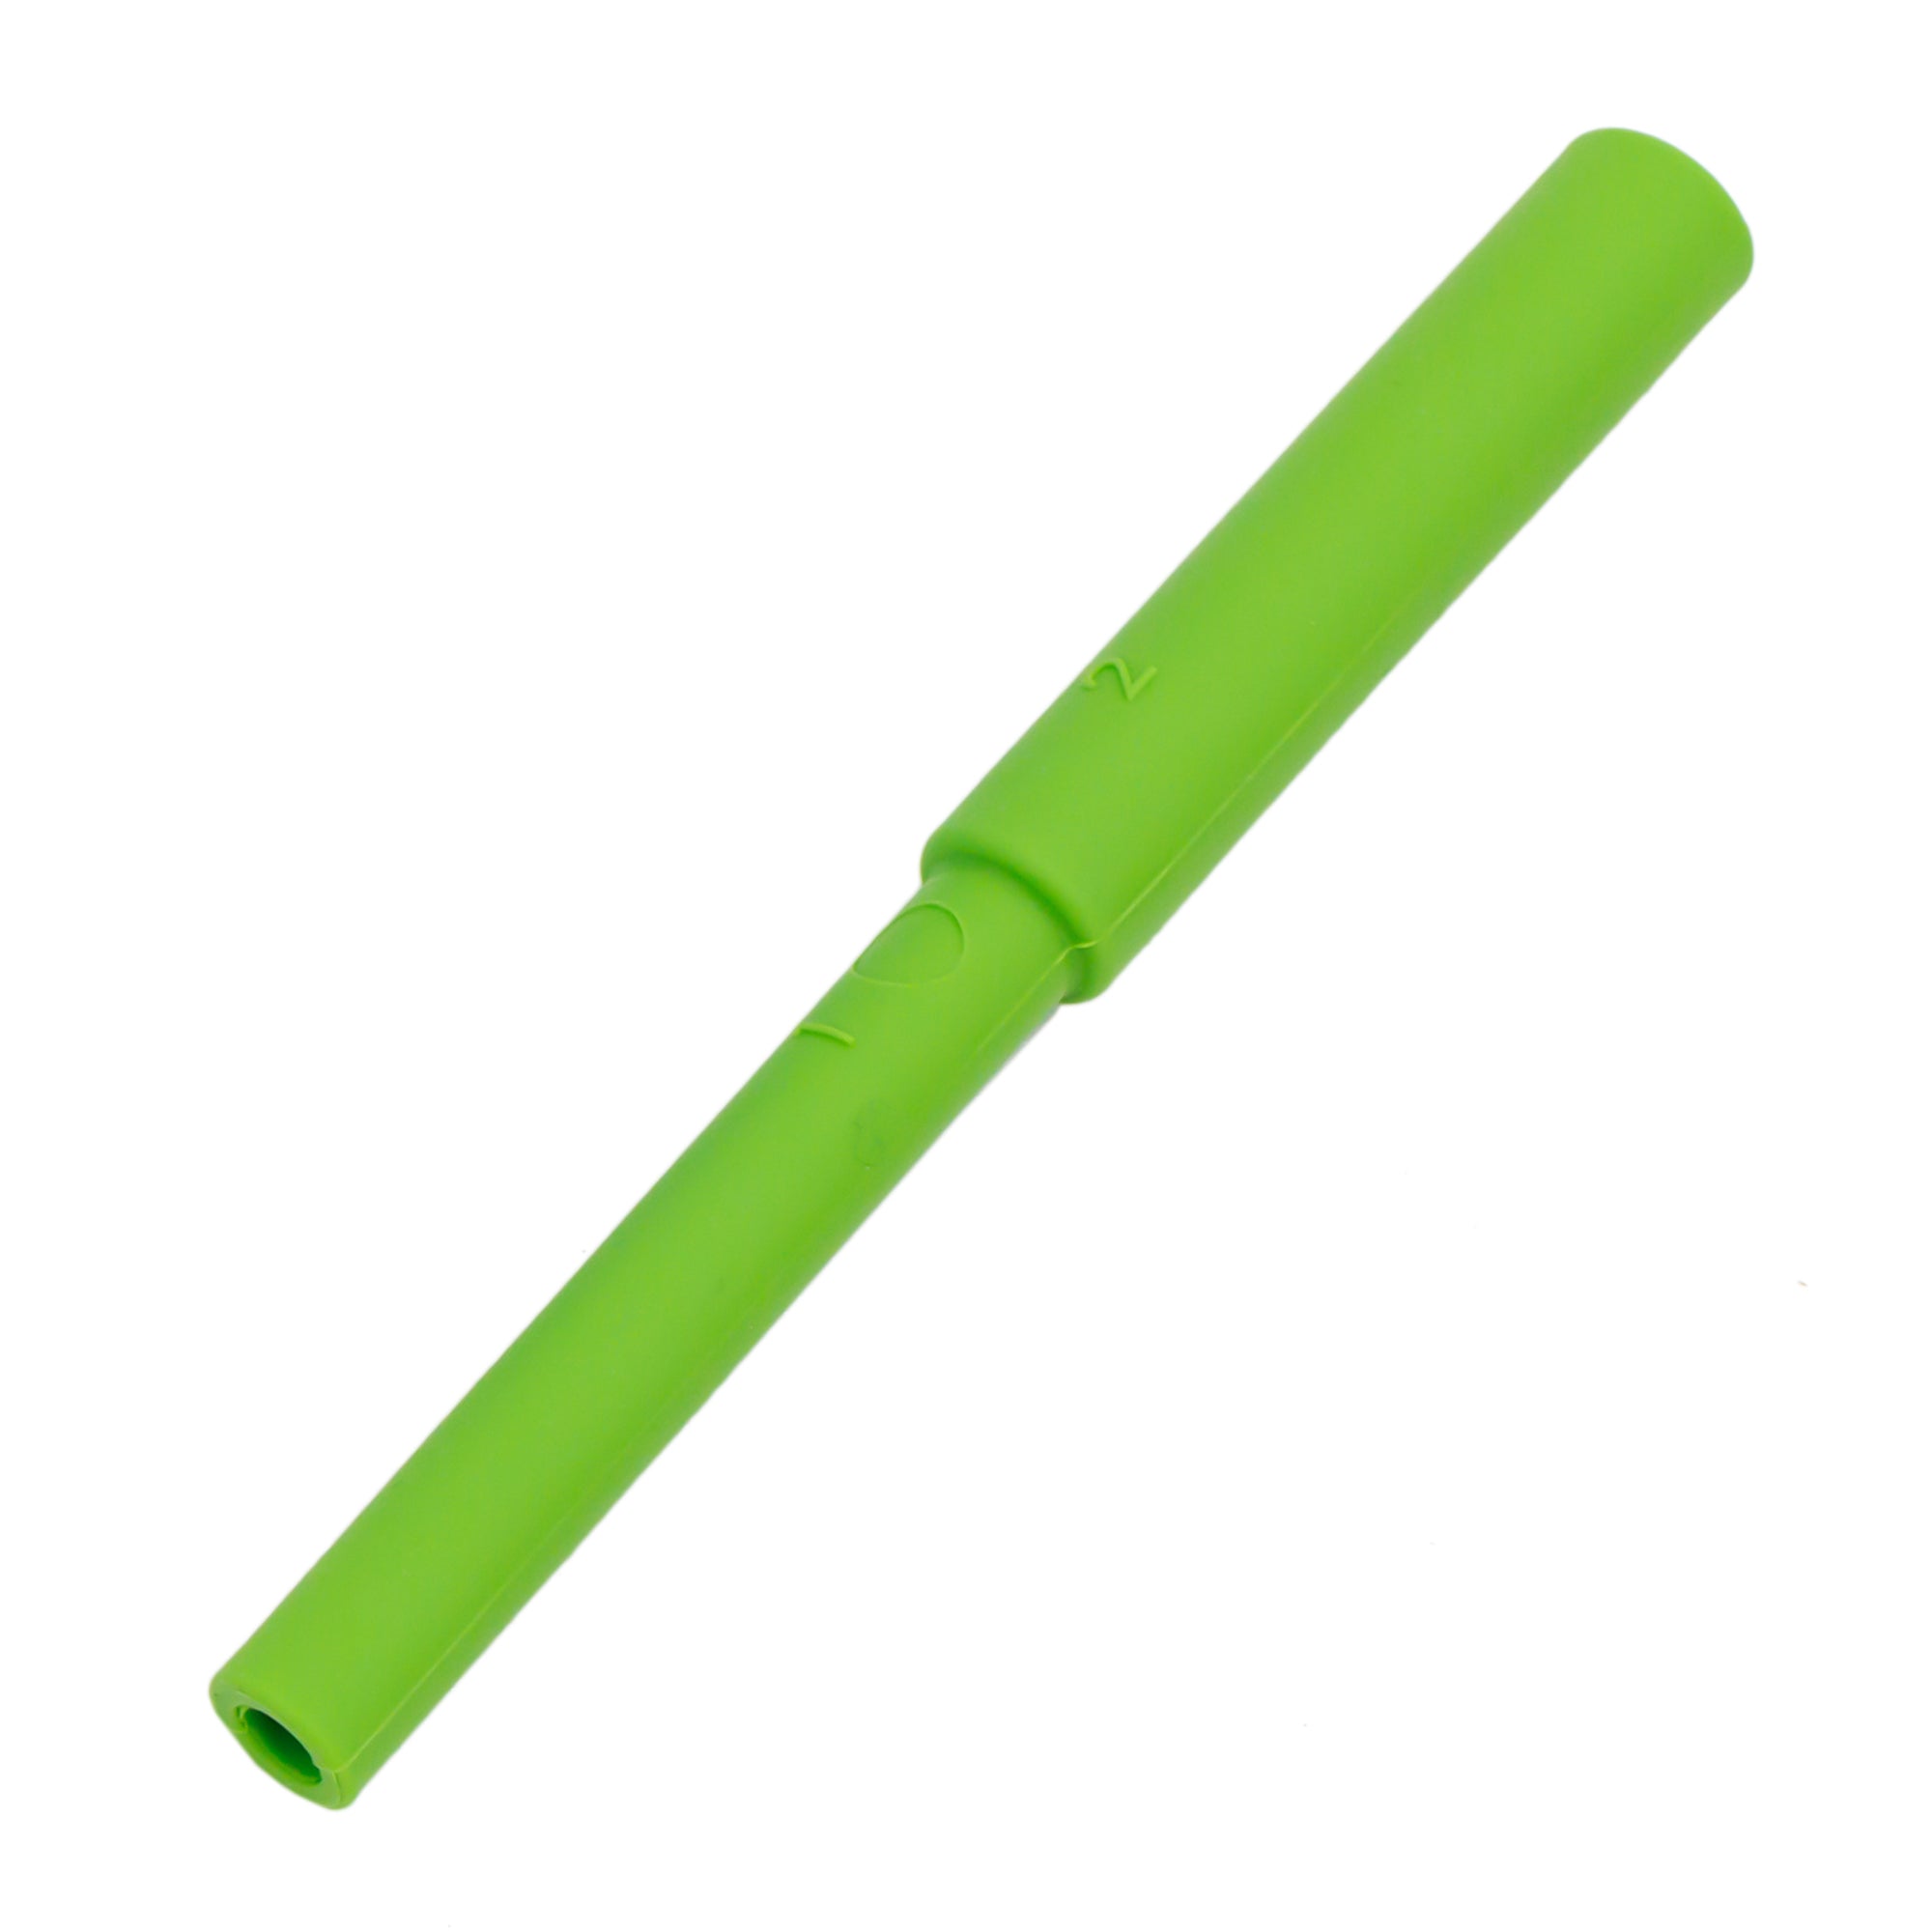 Bright green tube shaped teether with a smaller-around tube shape on the bottom half.